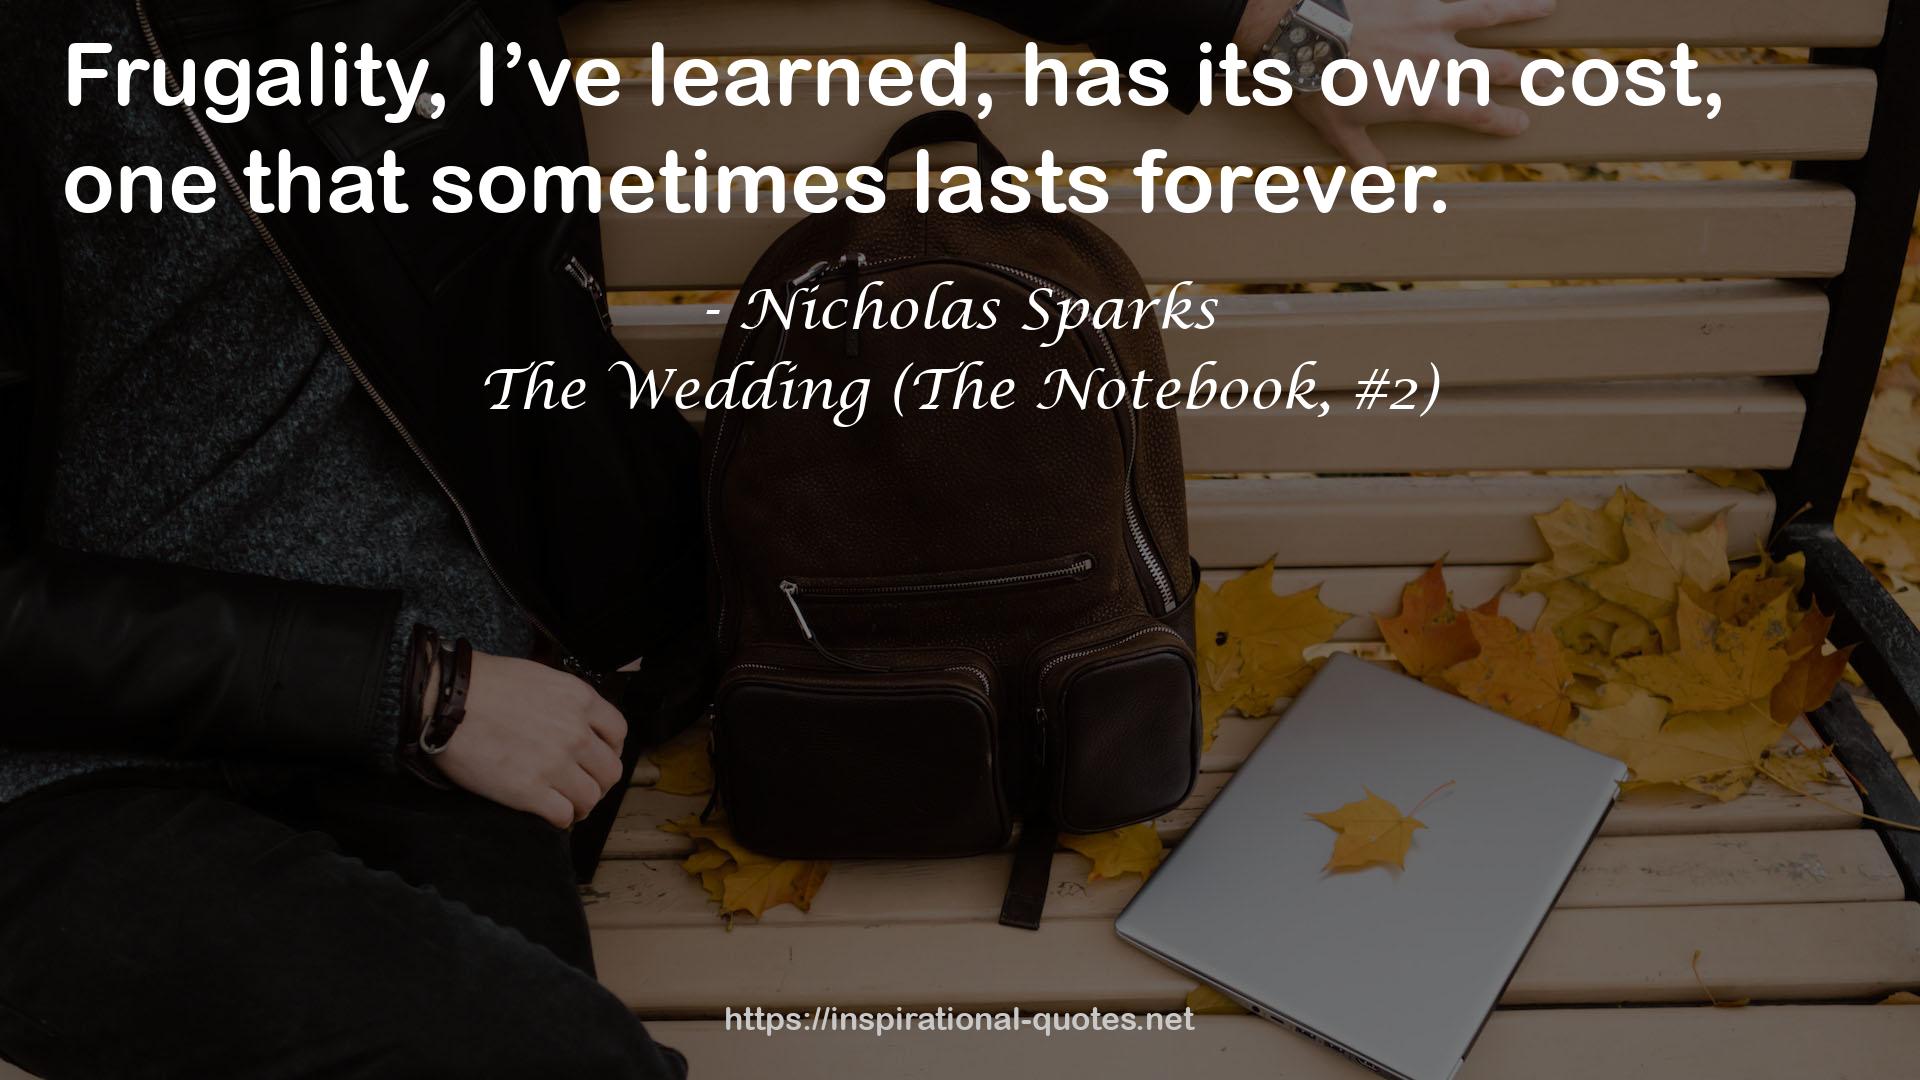 The Wedding (The Notebook, #2) QUOTES